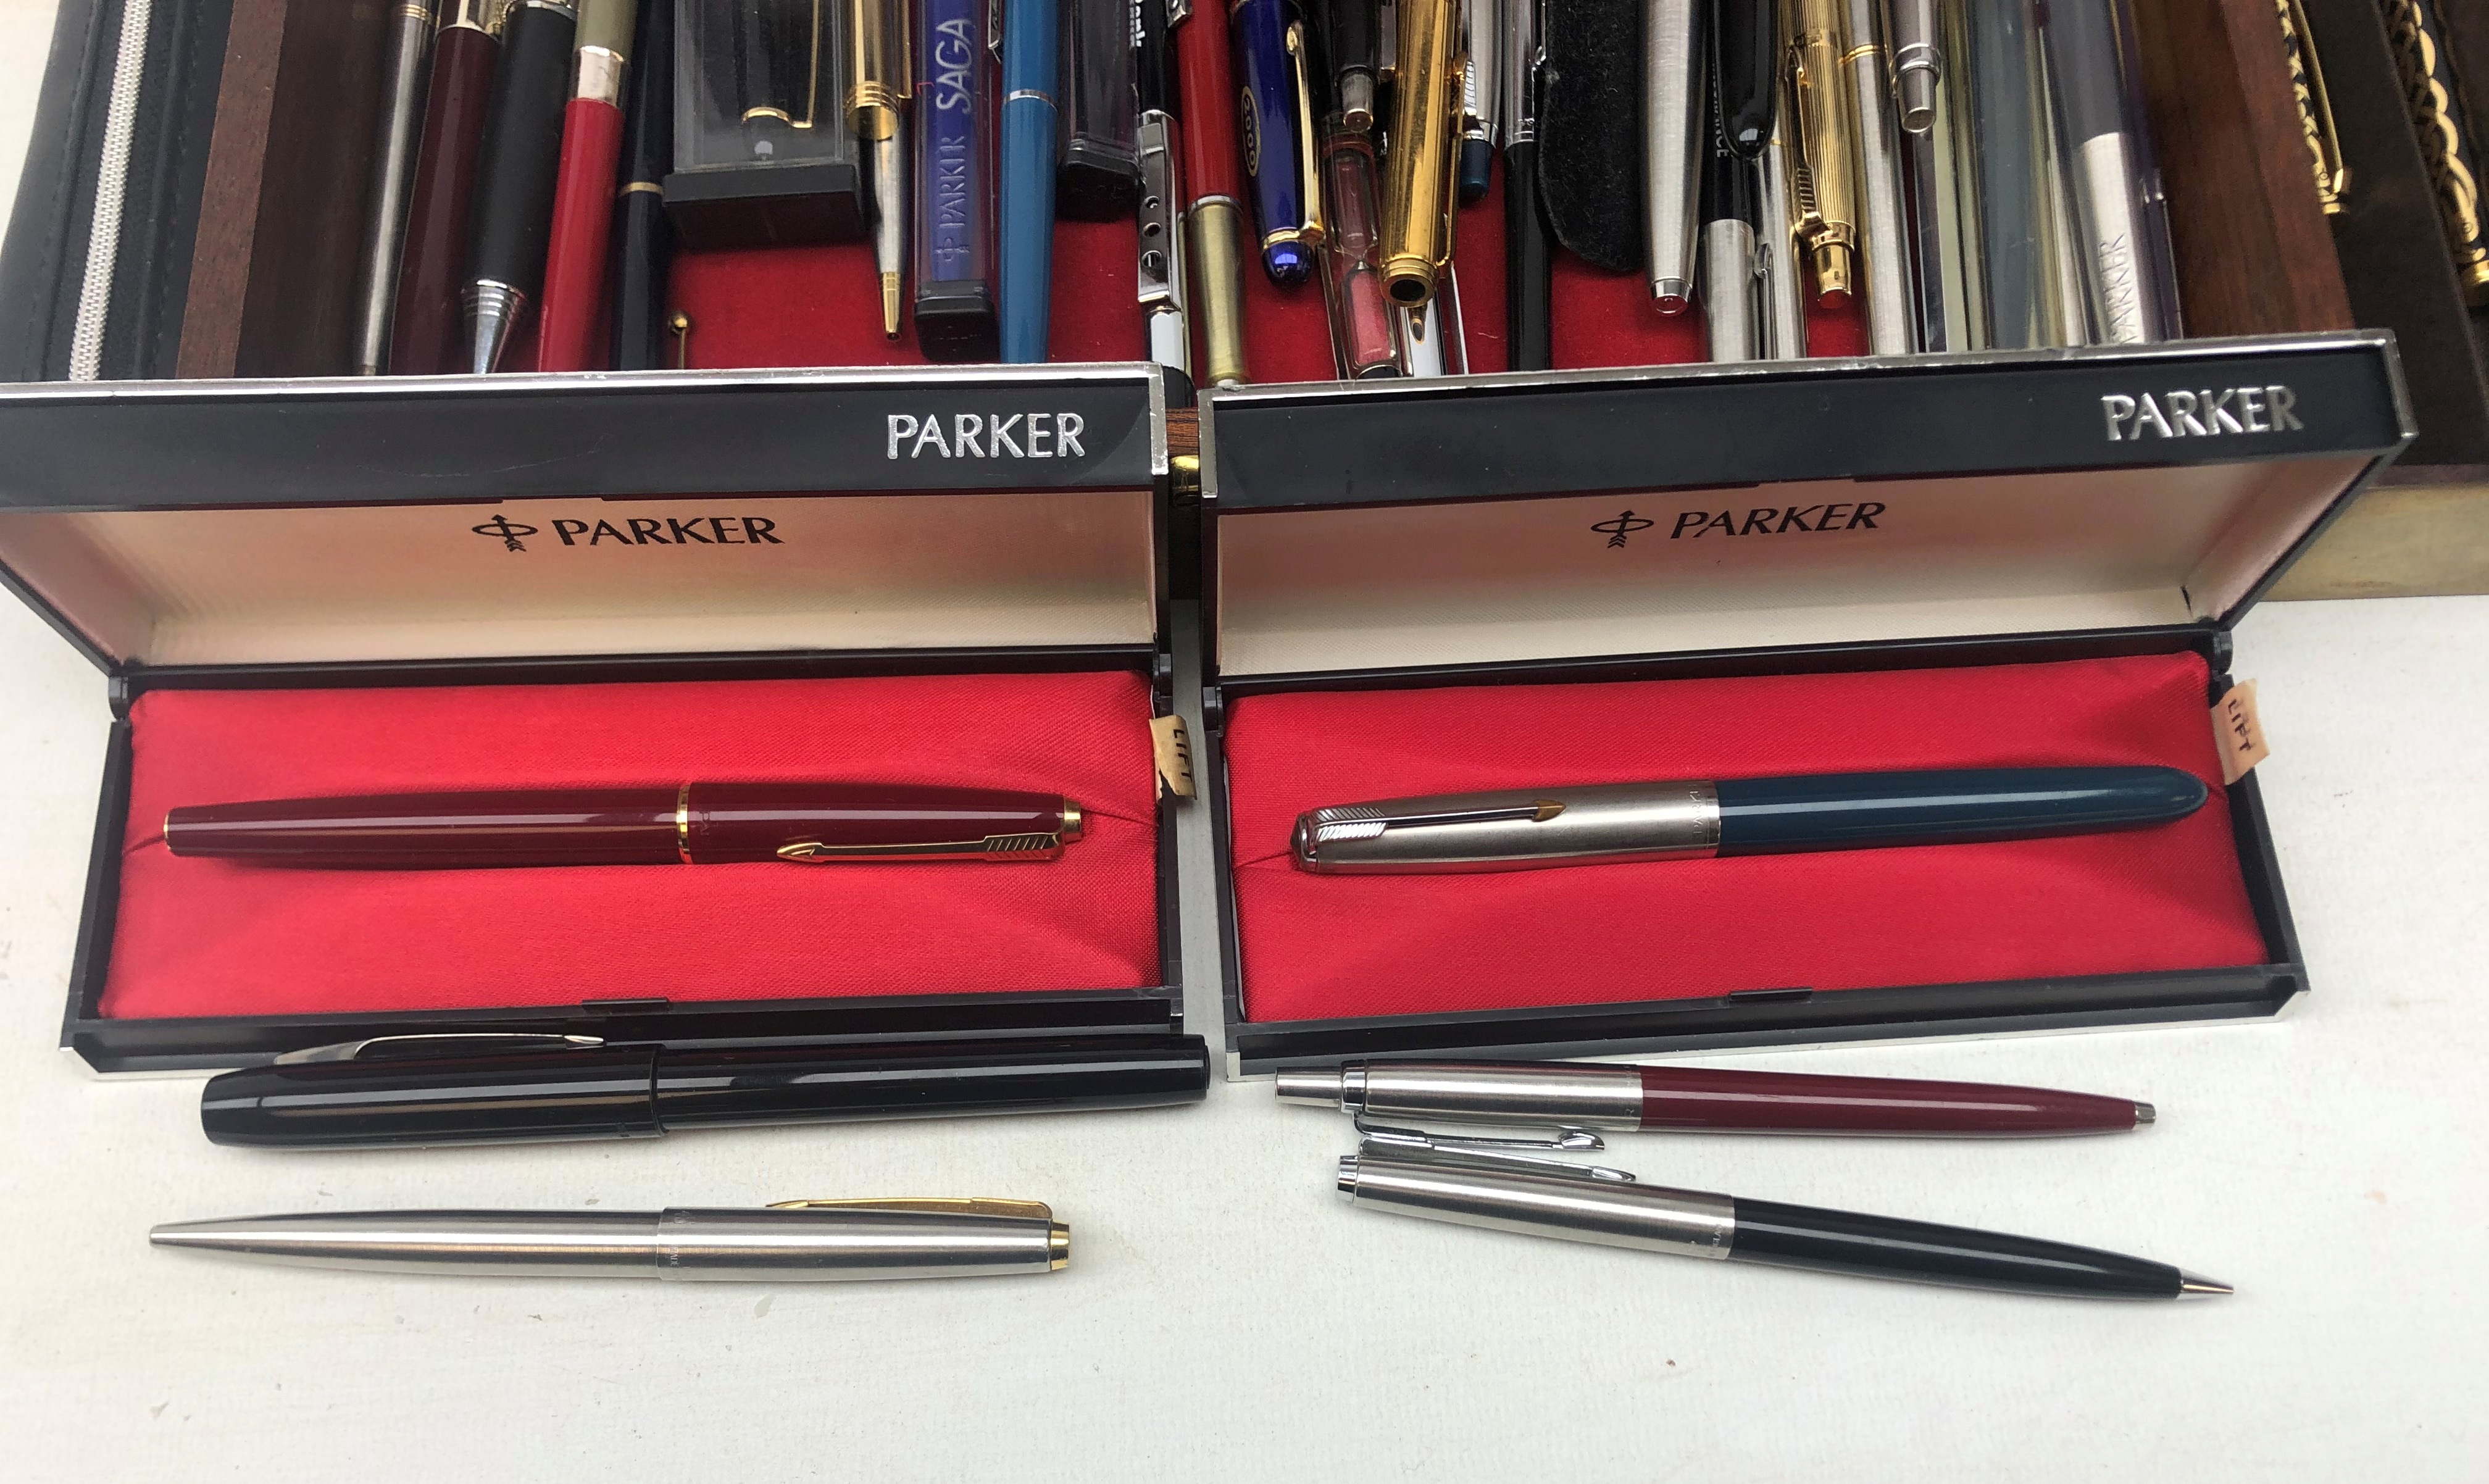 Forteen Parker pens including Fountain and Ballpoint, a Telescopic octagonal chrome pen, - Image 3 of 3